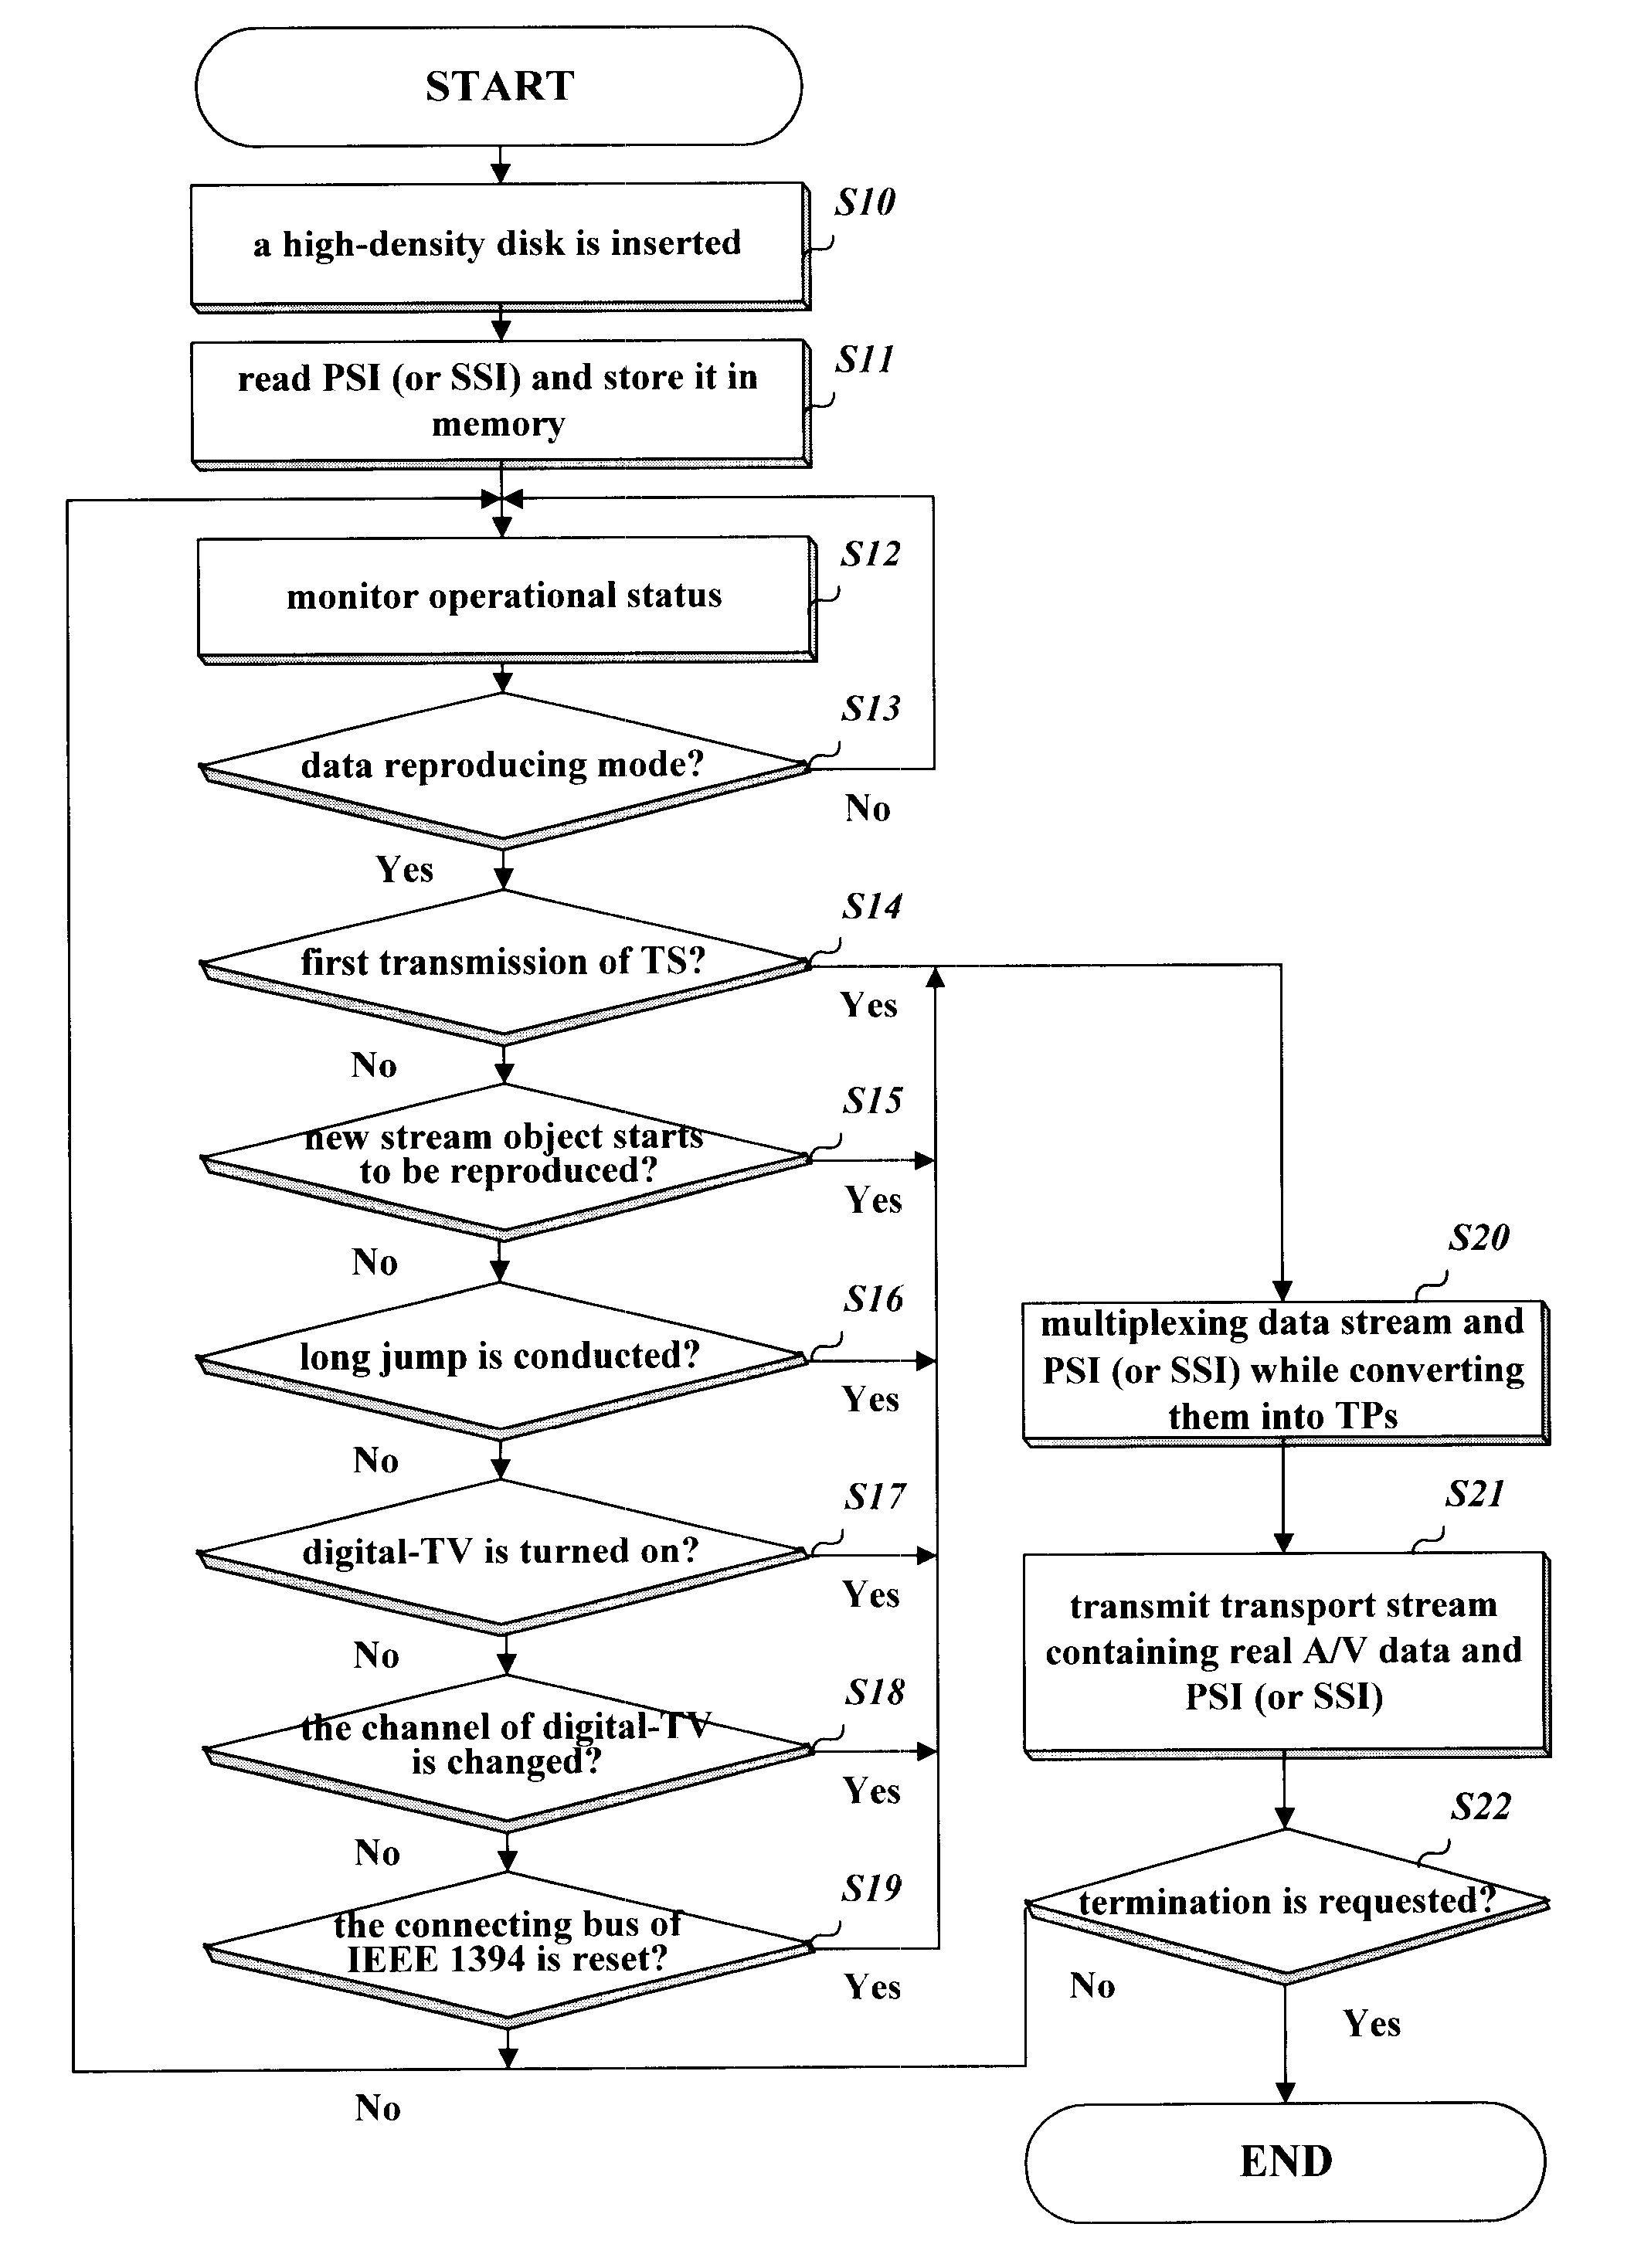 Method for recording stream specific information in a disk and providing the recorded information